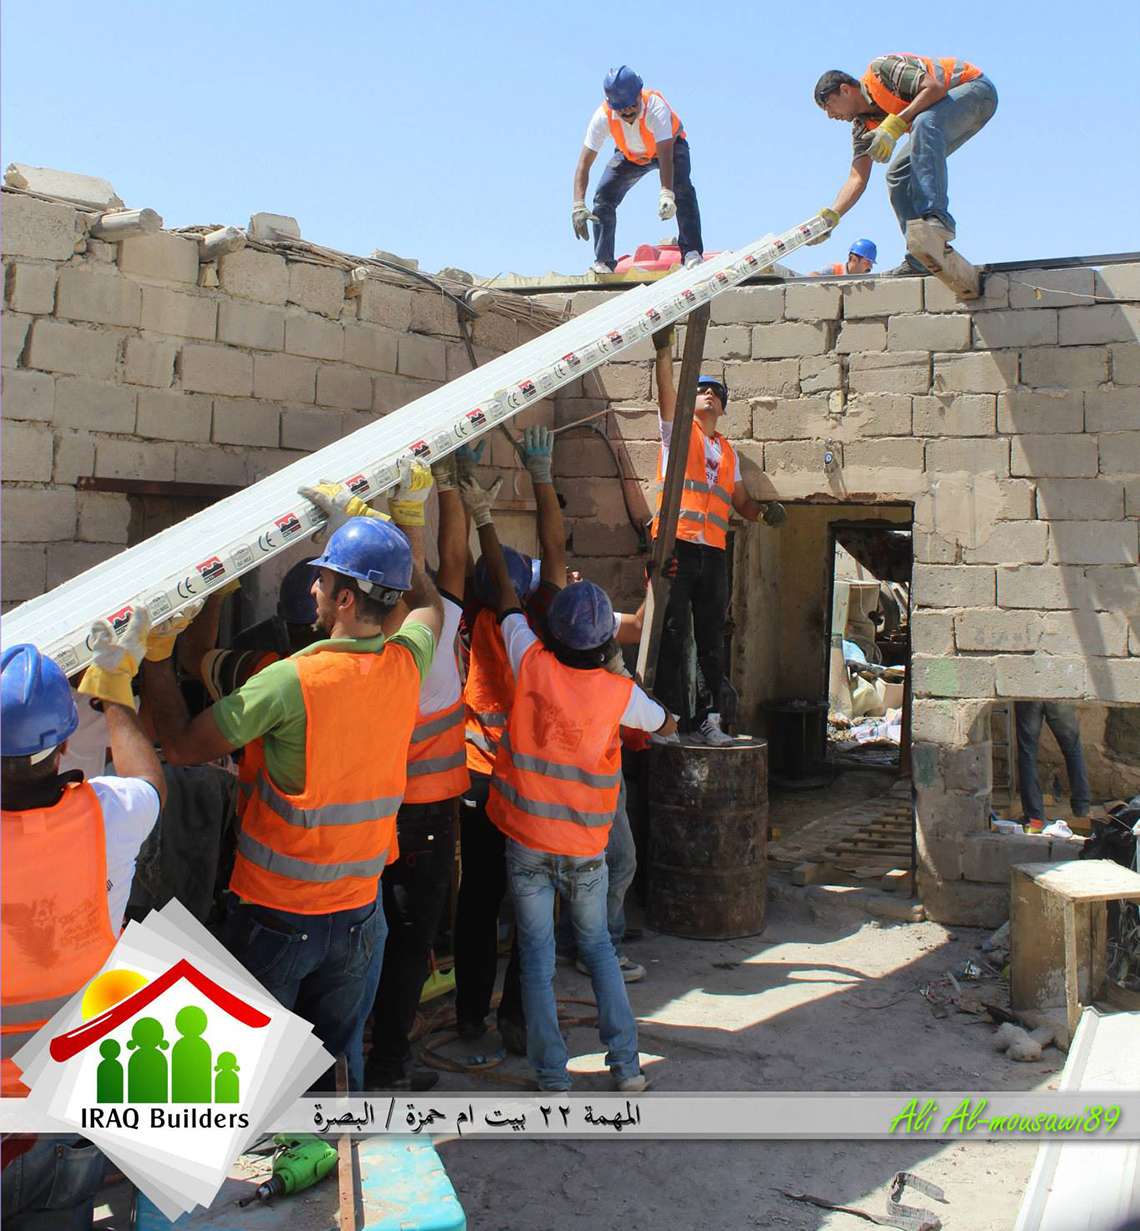 “In the middle of chaos, a bright side”: Iraq Builders celebrates
one year of repairing homes around Baghdad